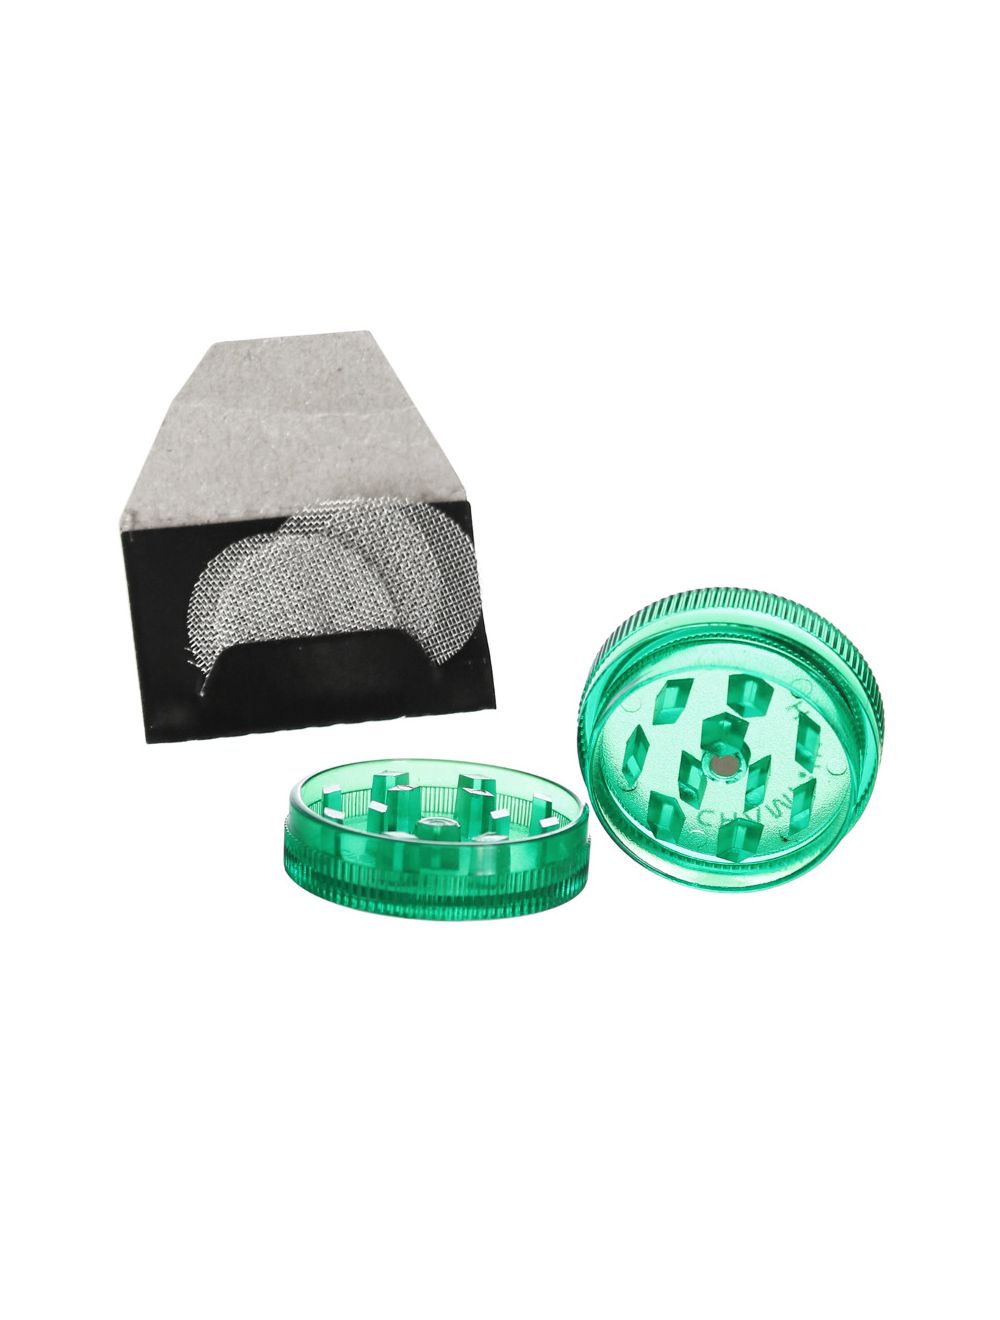 CHAMP HIGH Pipe and Grinder Set of Plastic